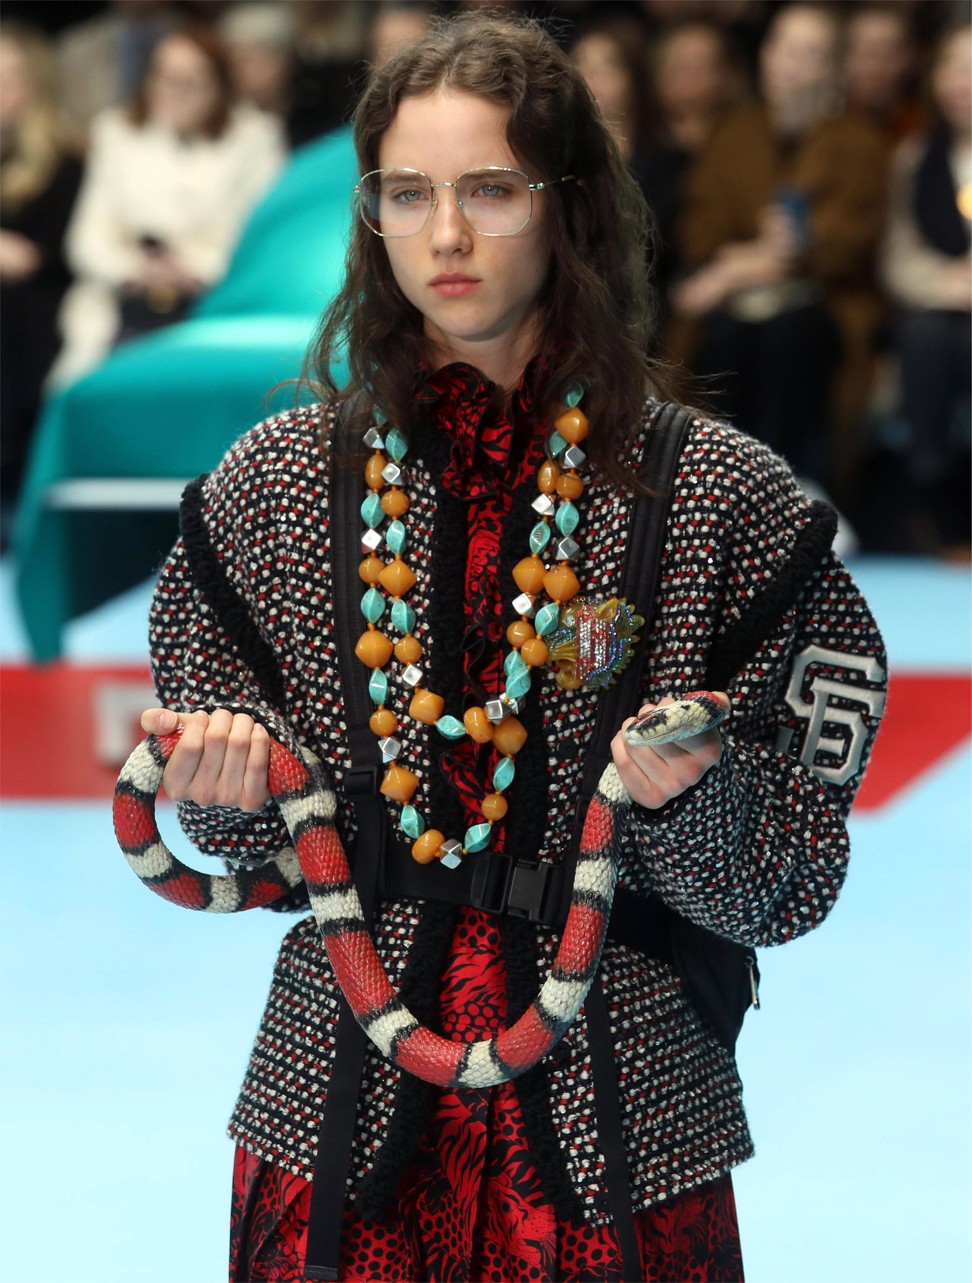 Milan Fashion Week: Gucci creates buzz with baby dragons, snakes, and ...